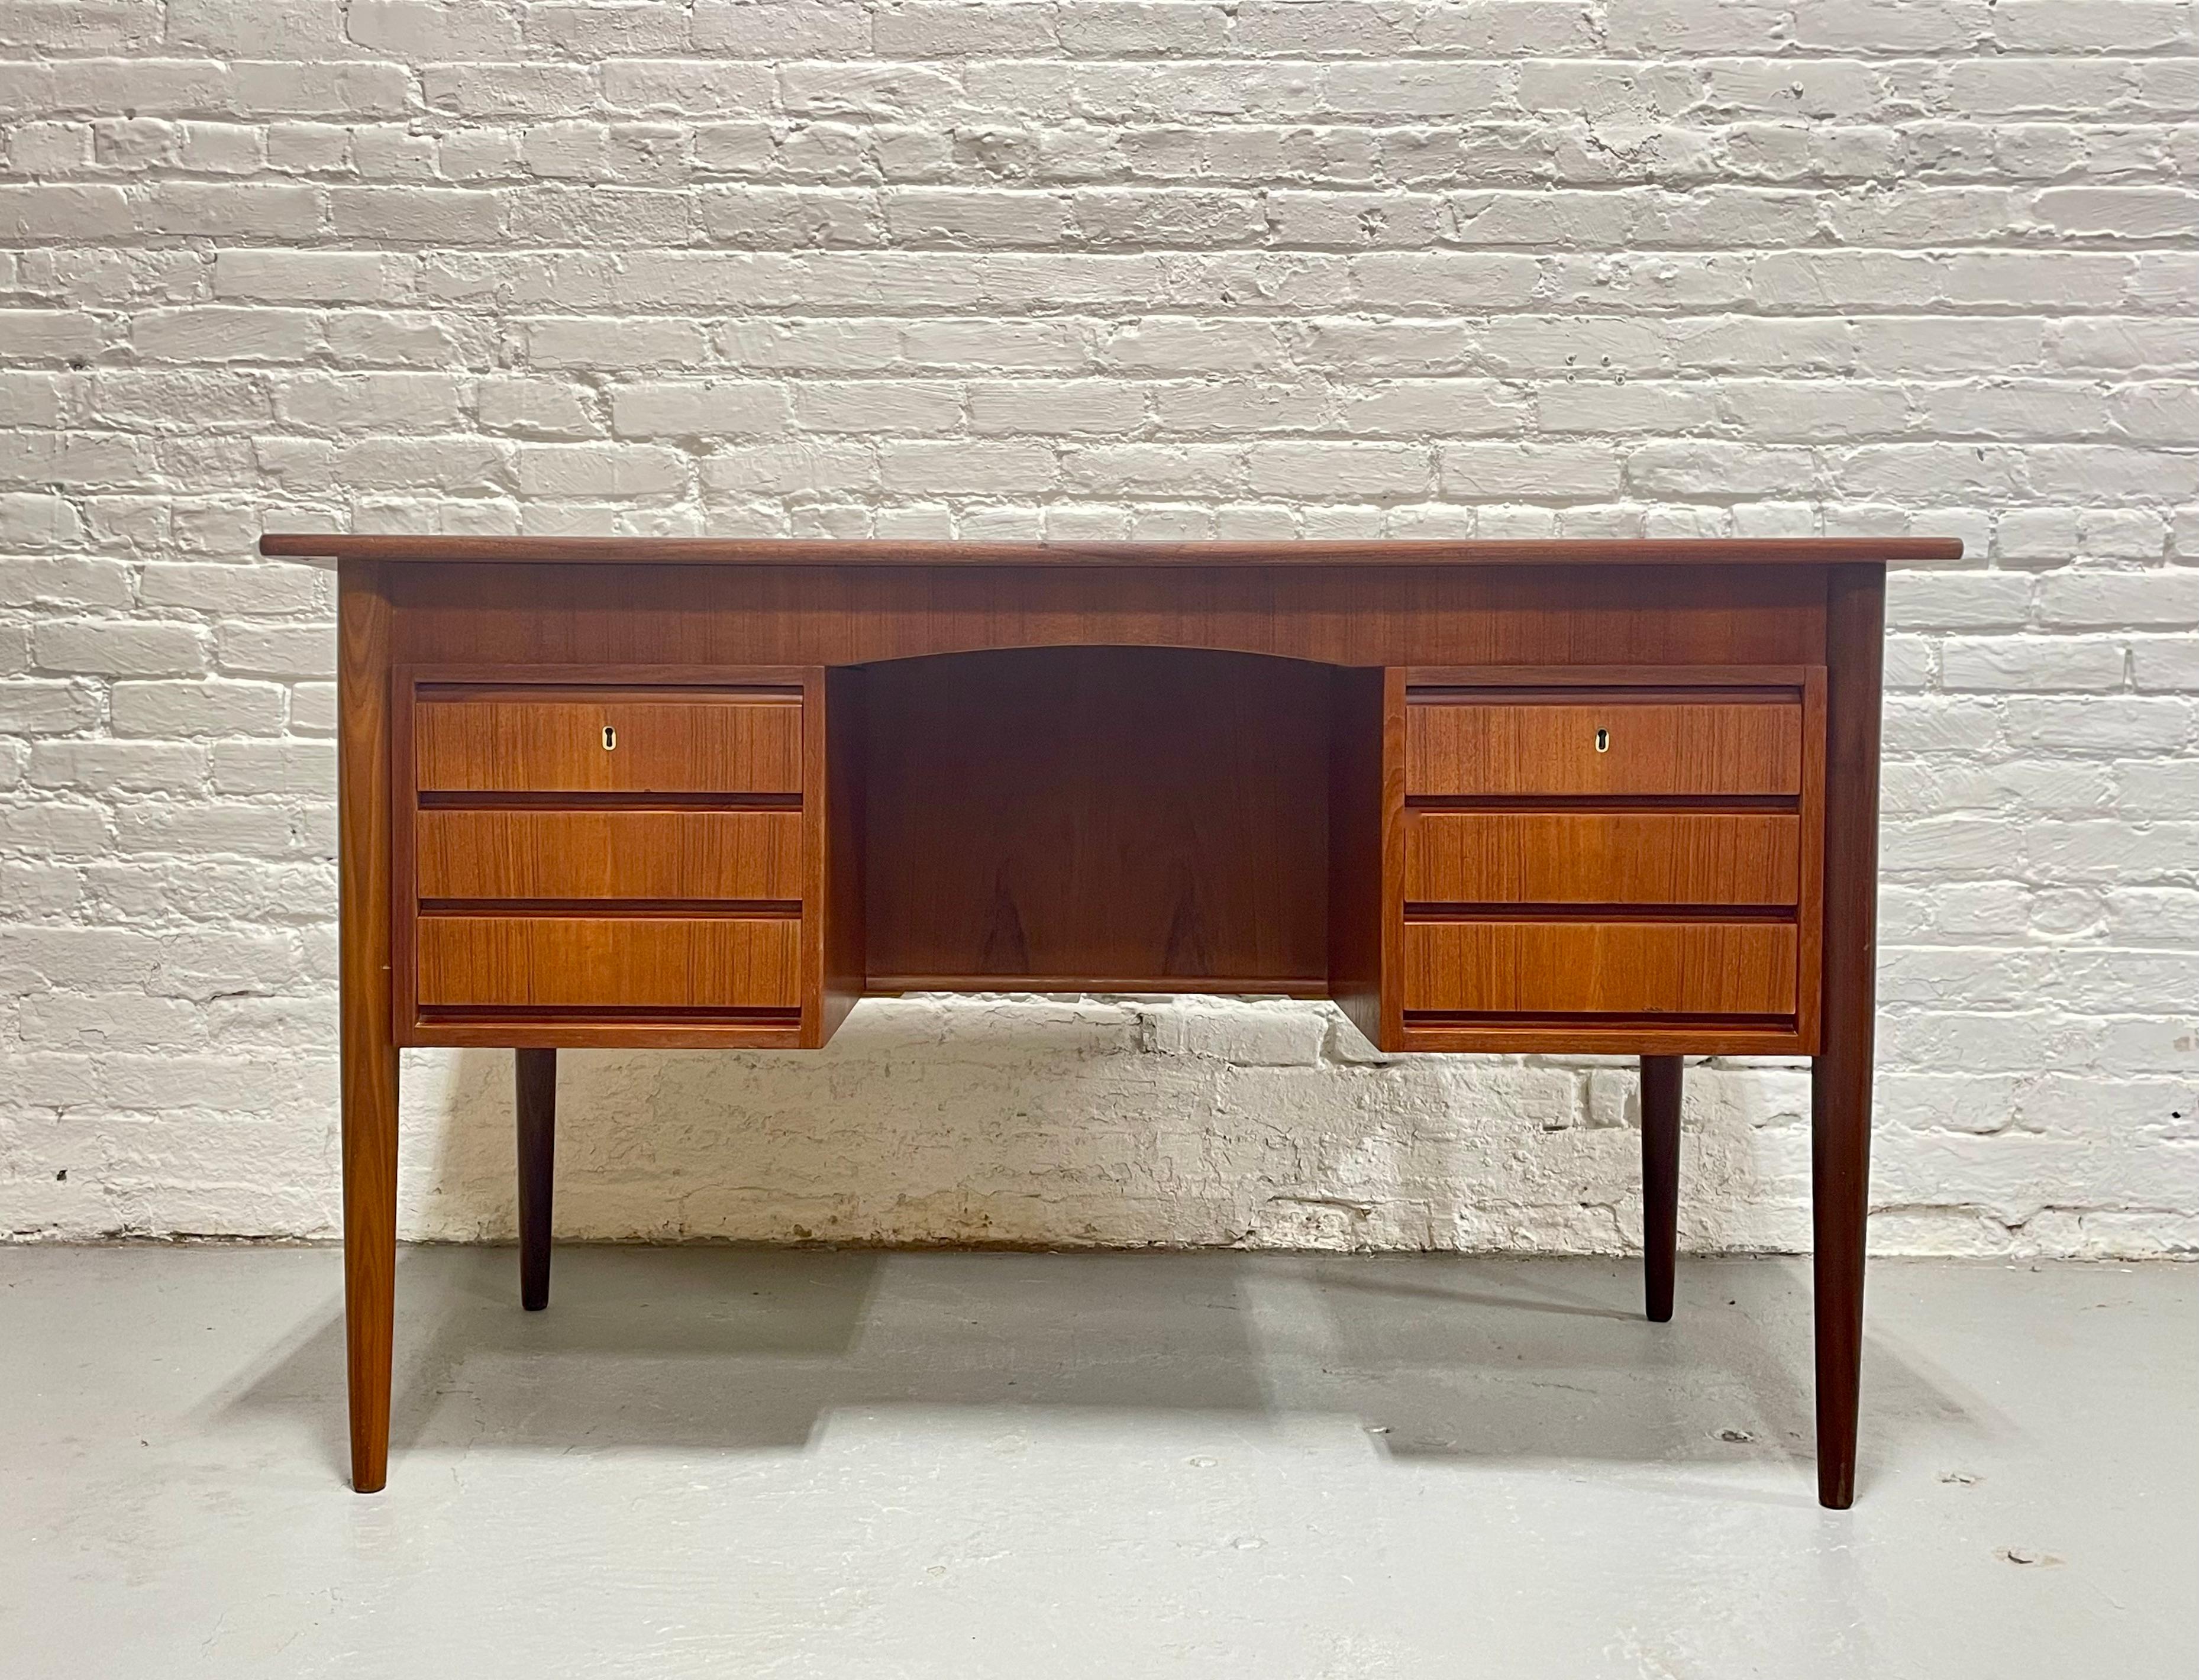 Absolutely Stunning Mid Century Modern Danish Teak Double Sided Desk, Made in Denmark, circa 1960s. This beauty offers three drawers along each side and an open area bookcase / display case at the back. Perfect piece if you need it to float in a